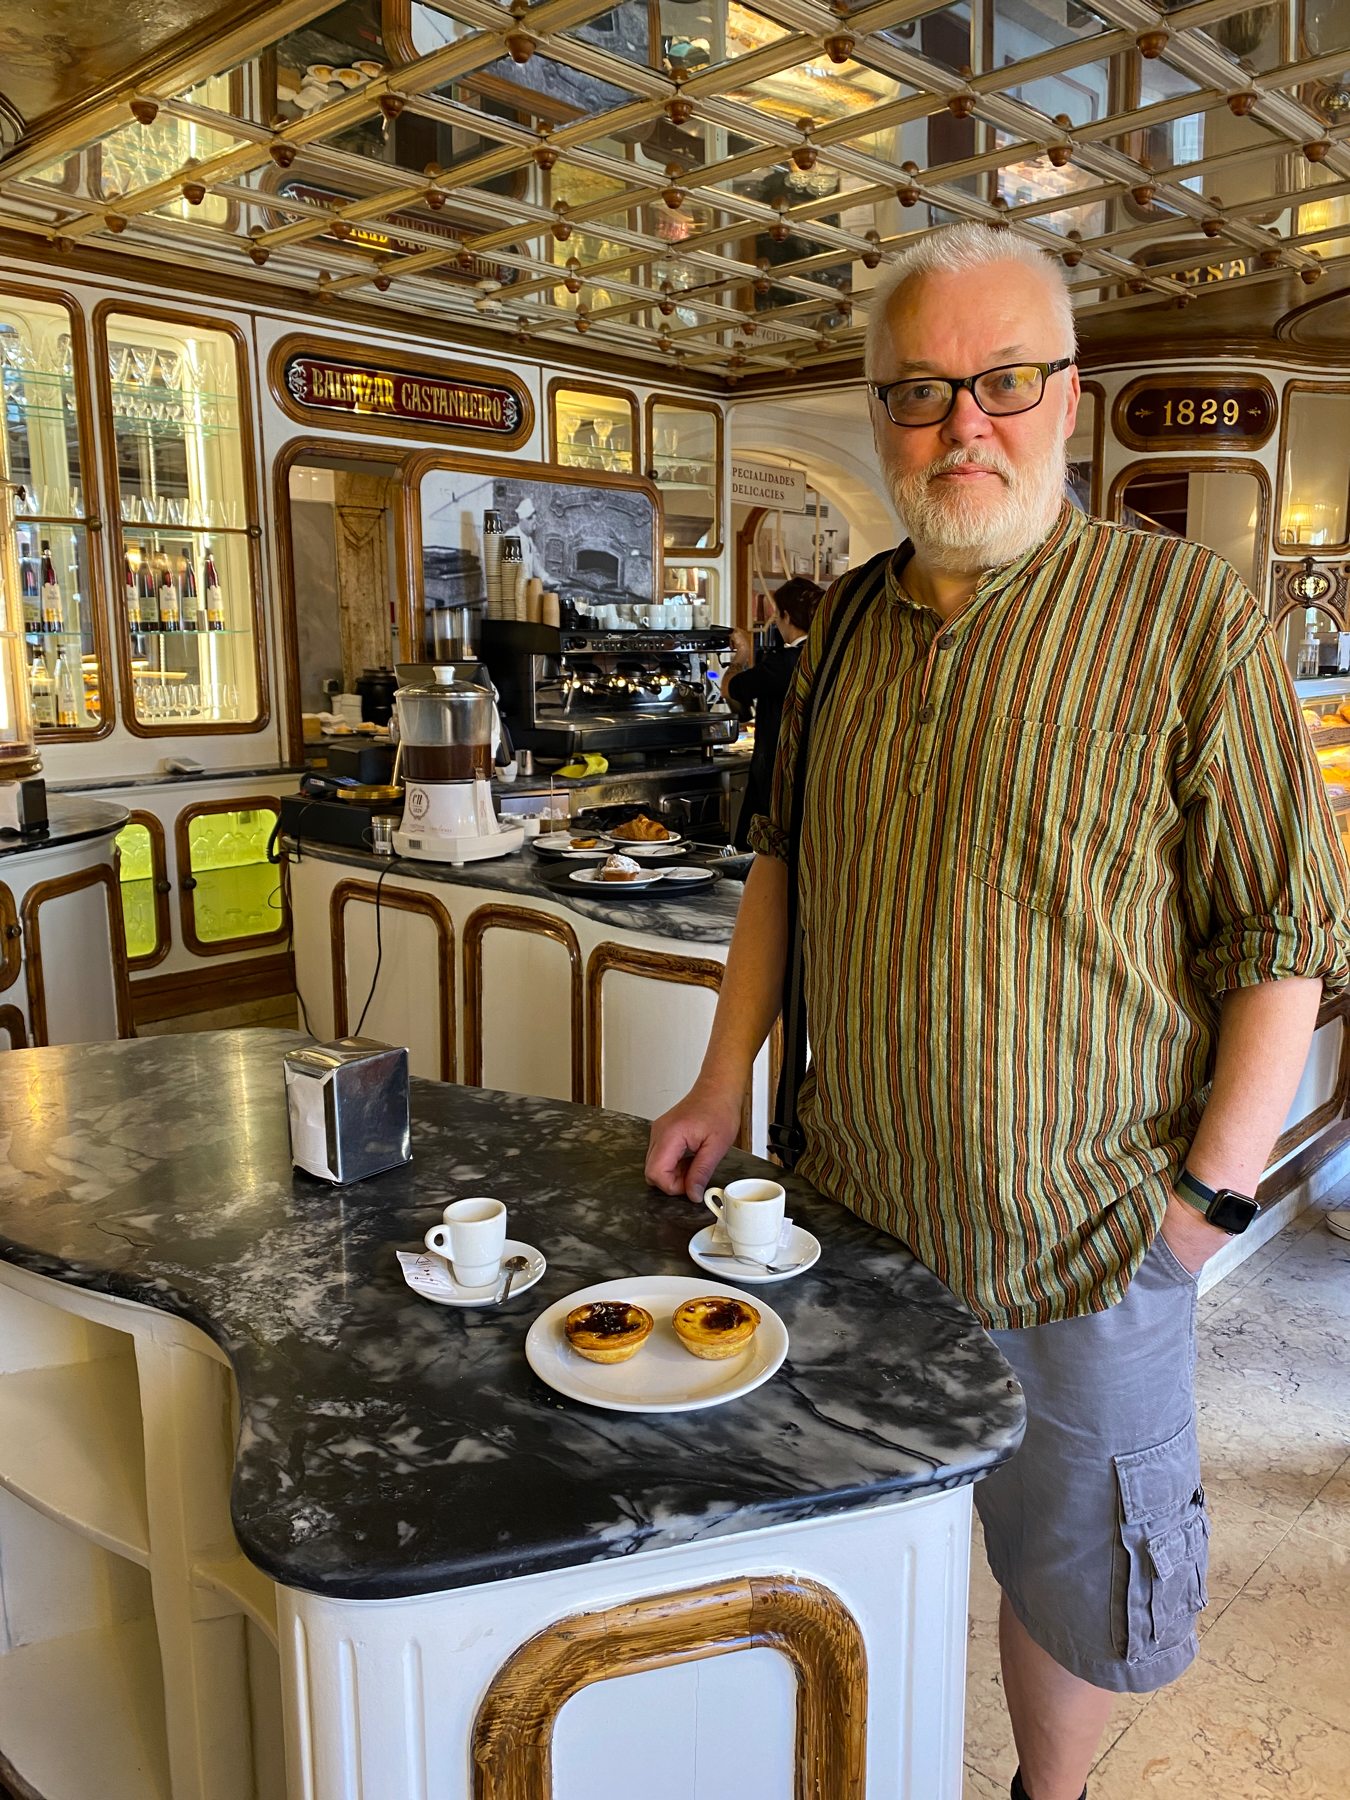 Man standing in interior of coffee shop, coffees and natas on counter in front of him